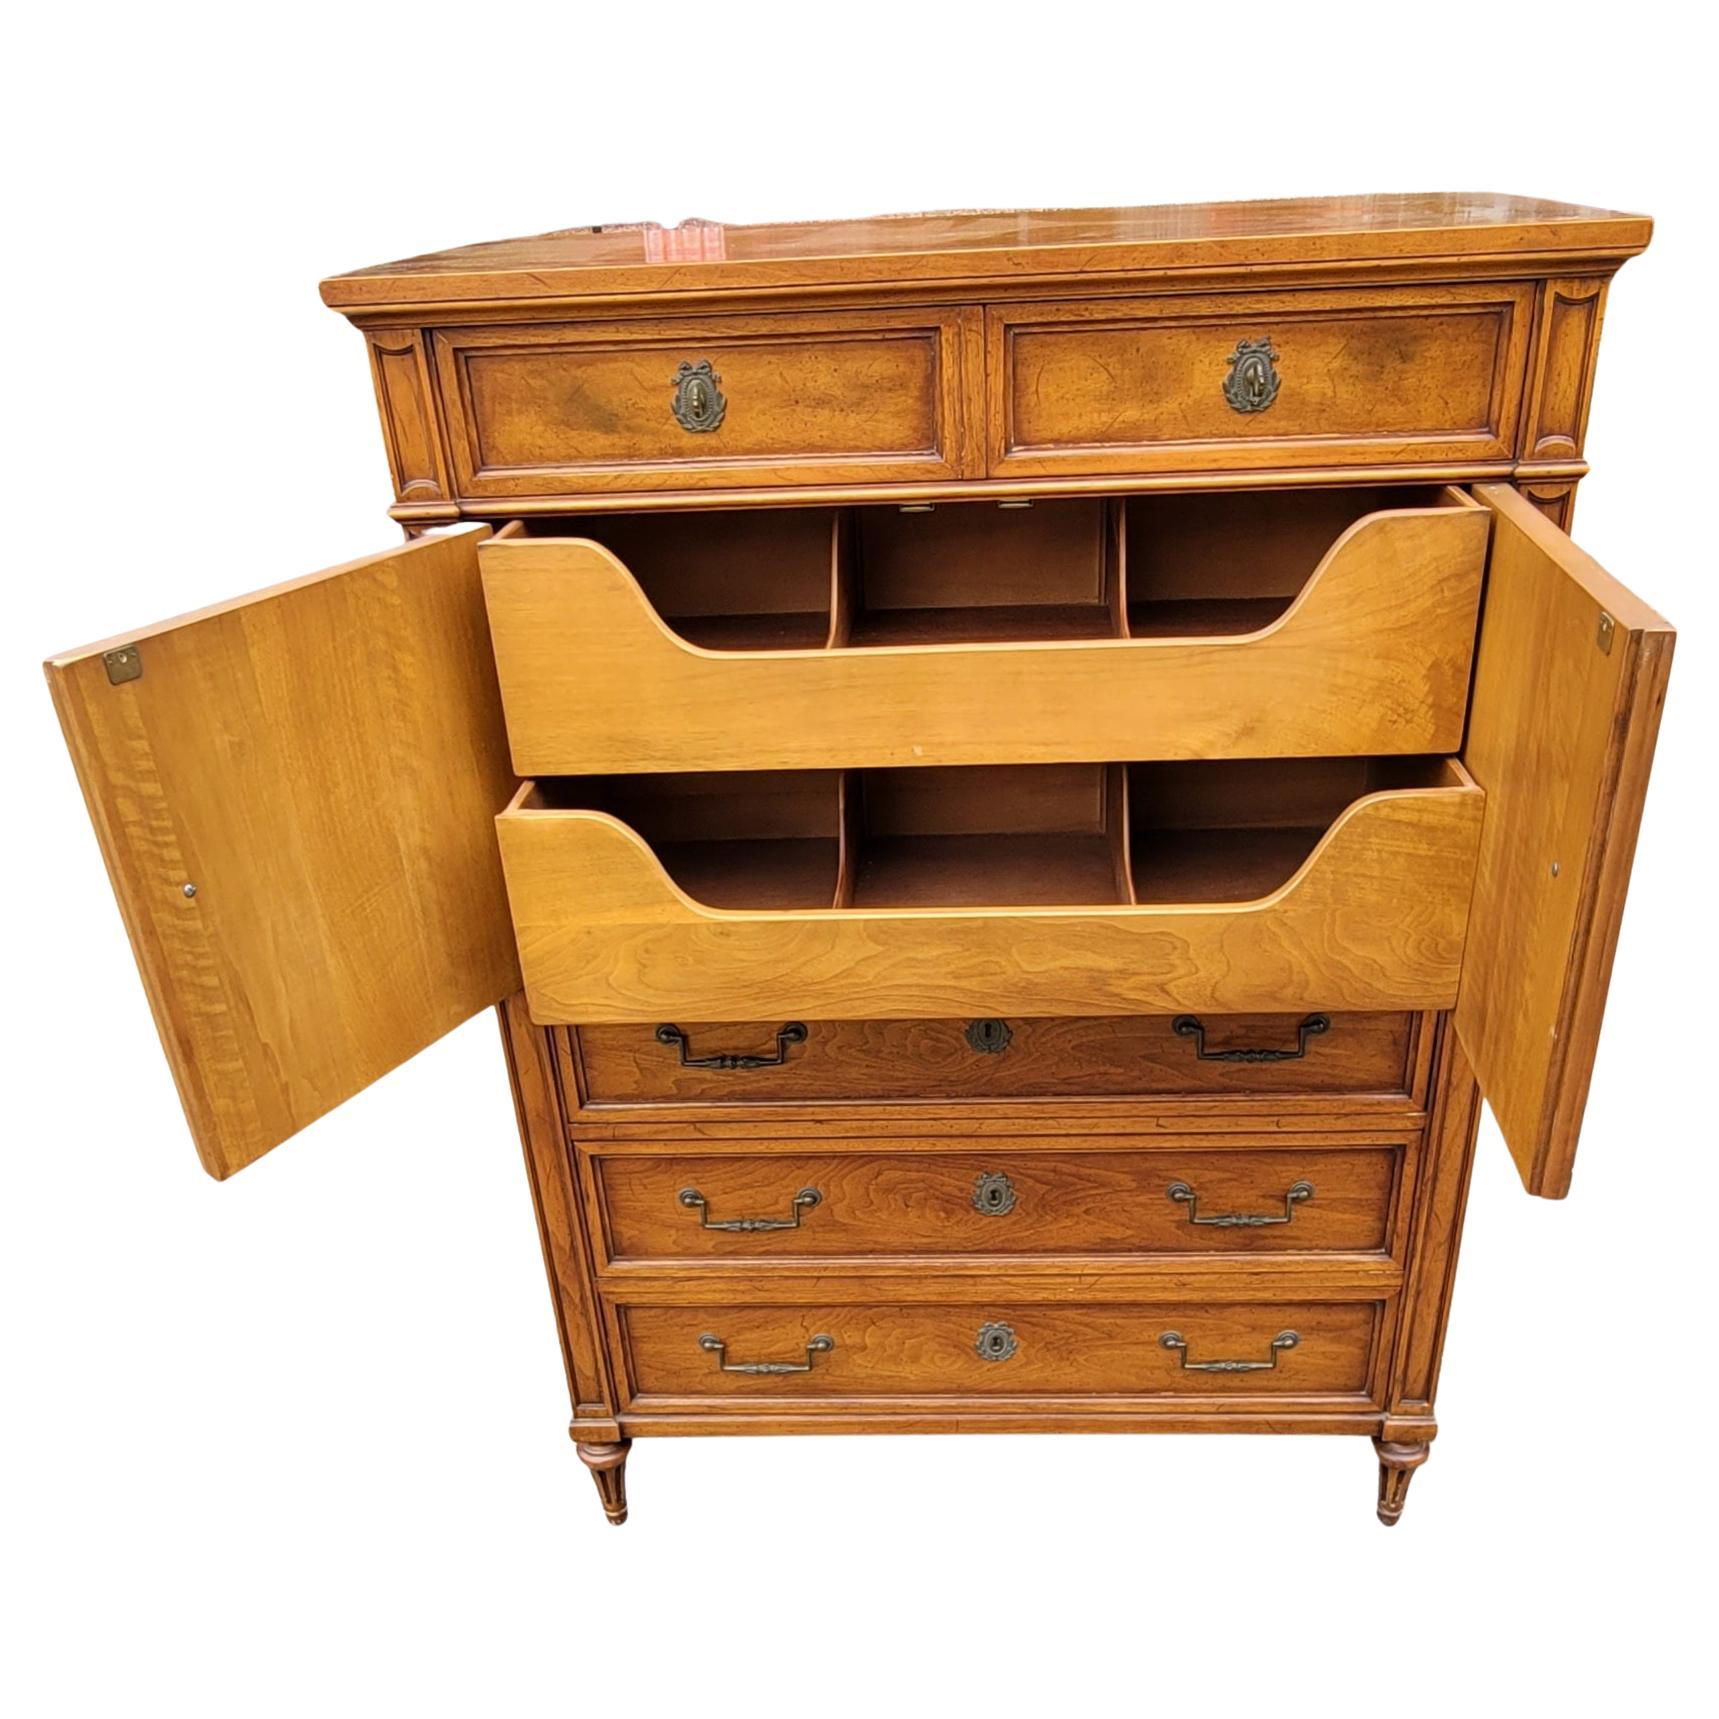 An Henredon custom Folio one fruitwood chest of drawers in very good vintage condition. Features 2 smaller top drawers, a two door cabinet and 3 large bottom drawers. 
Measures 40